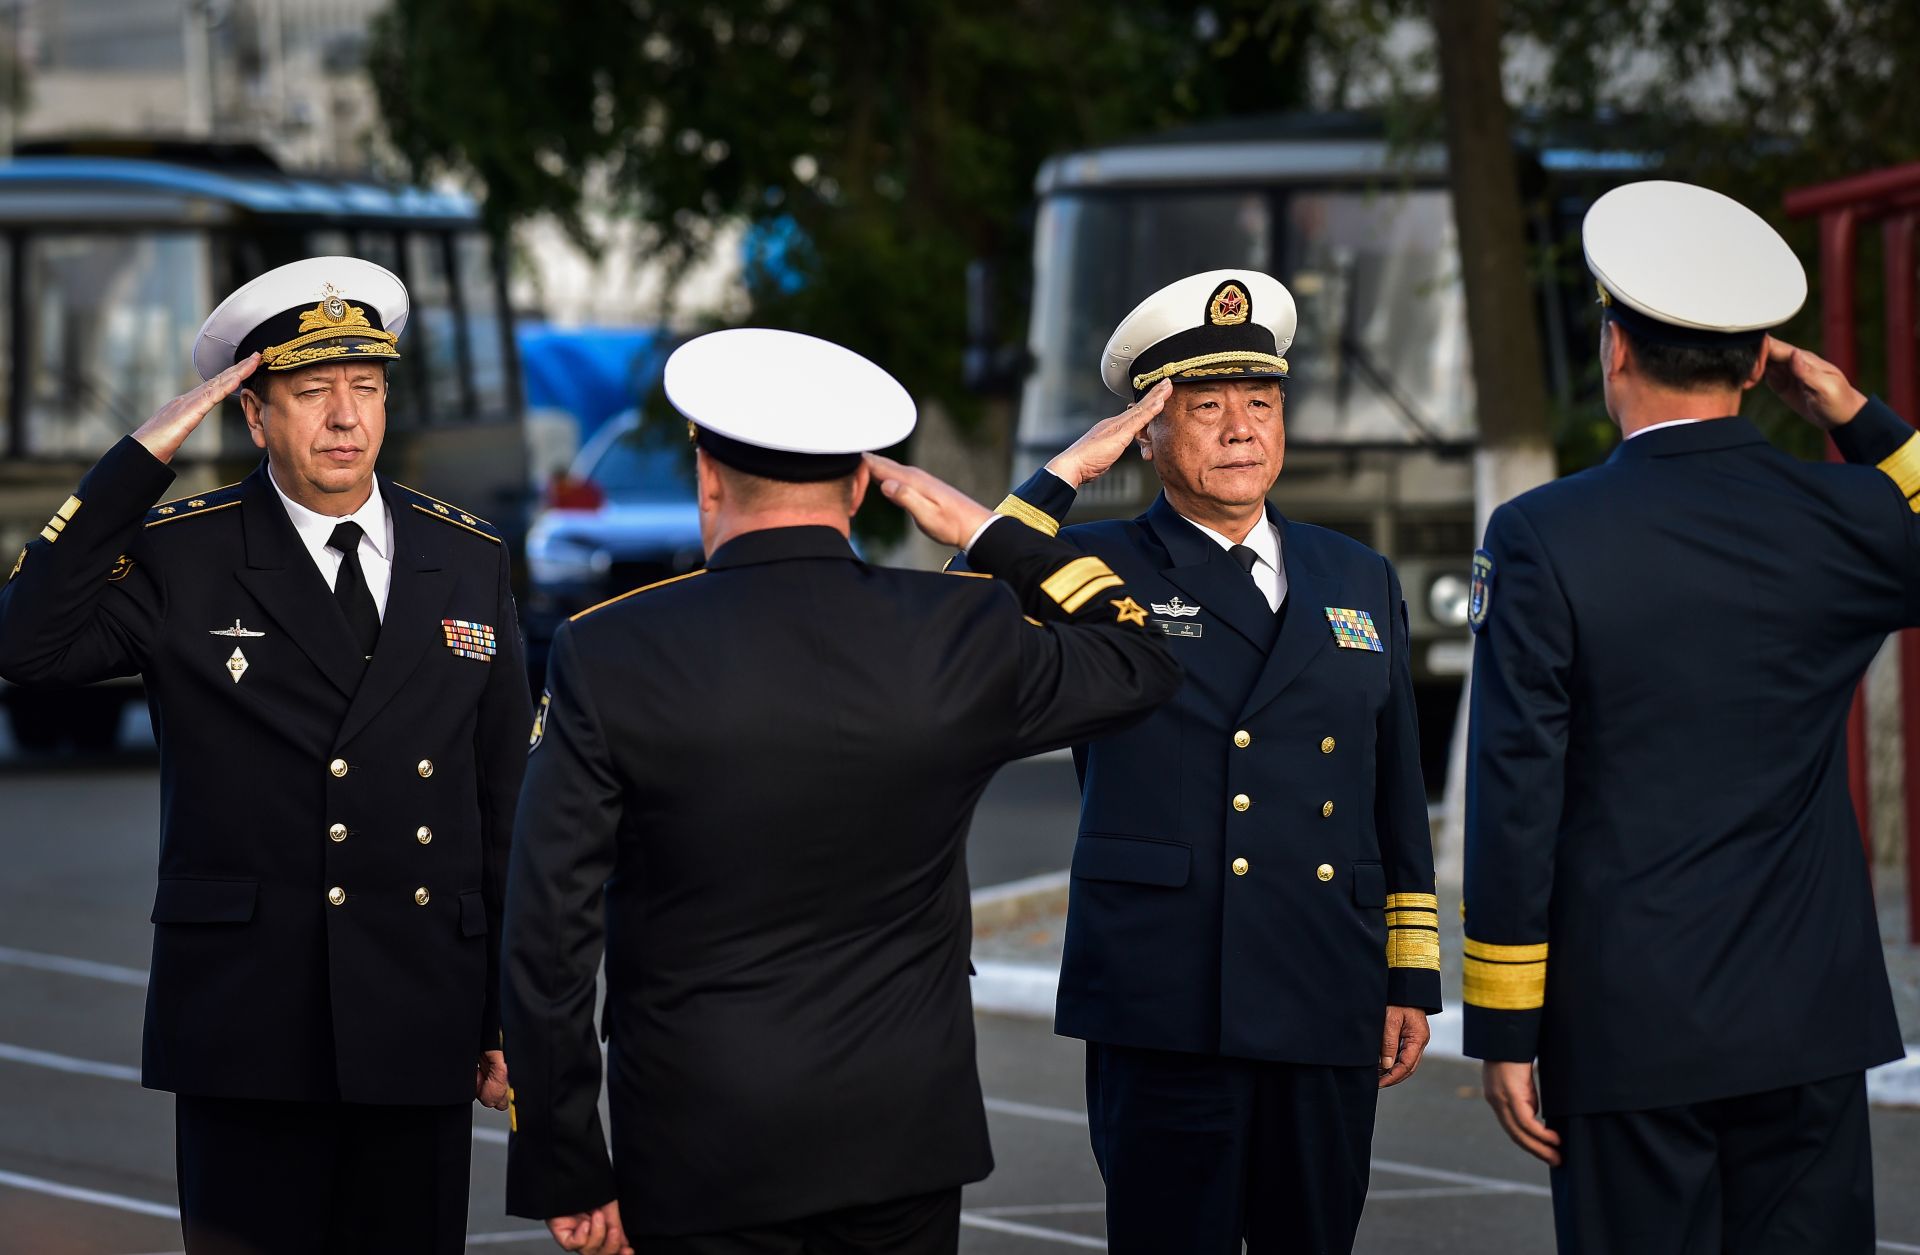 Military officials salute each other in a ceremony before Russia and China warships set out for a naval cooperation exercise.